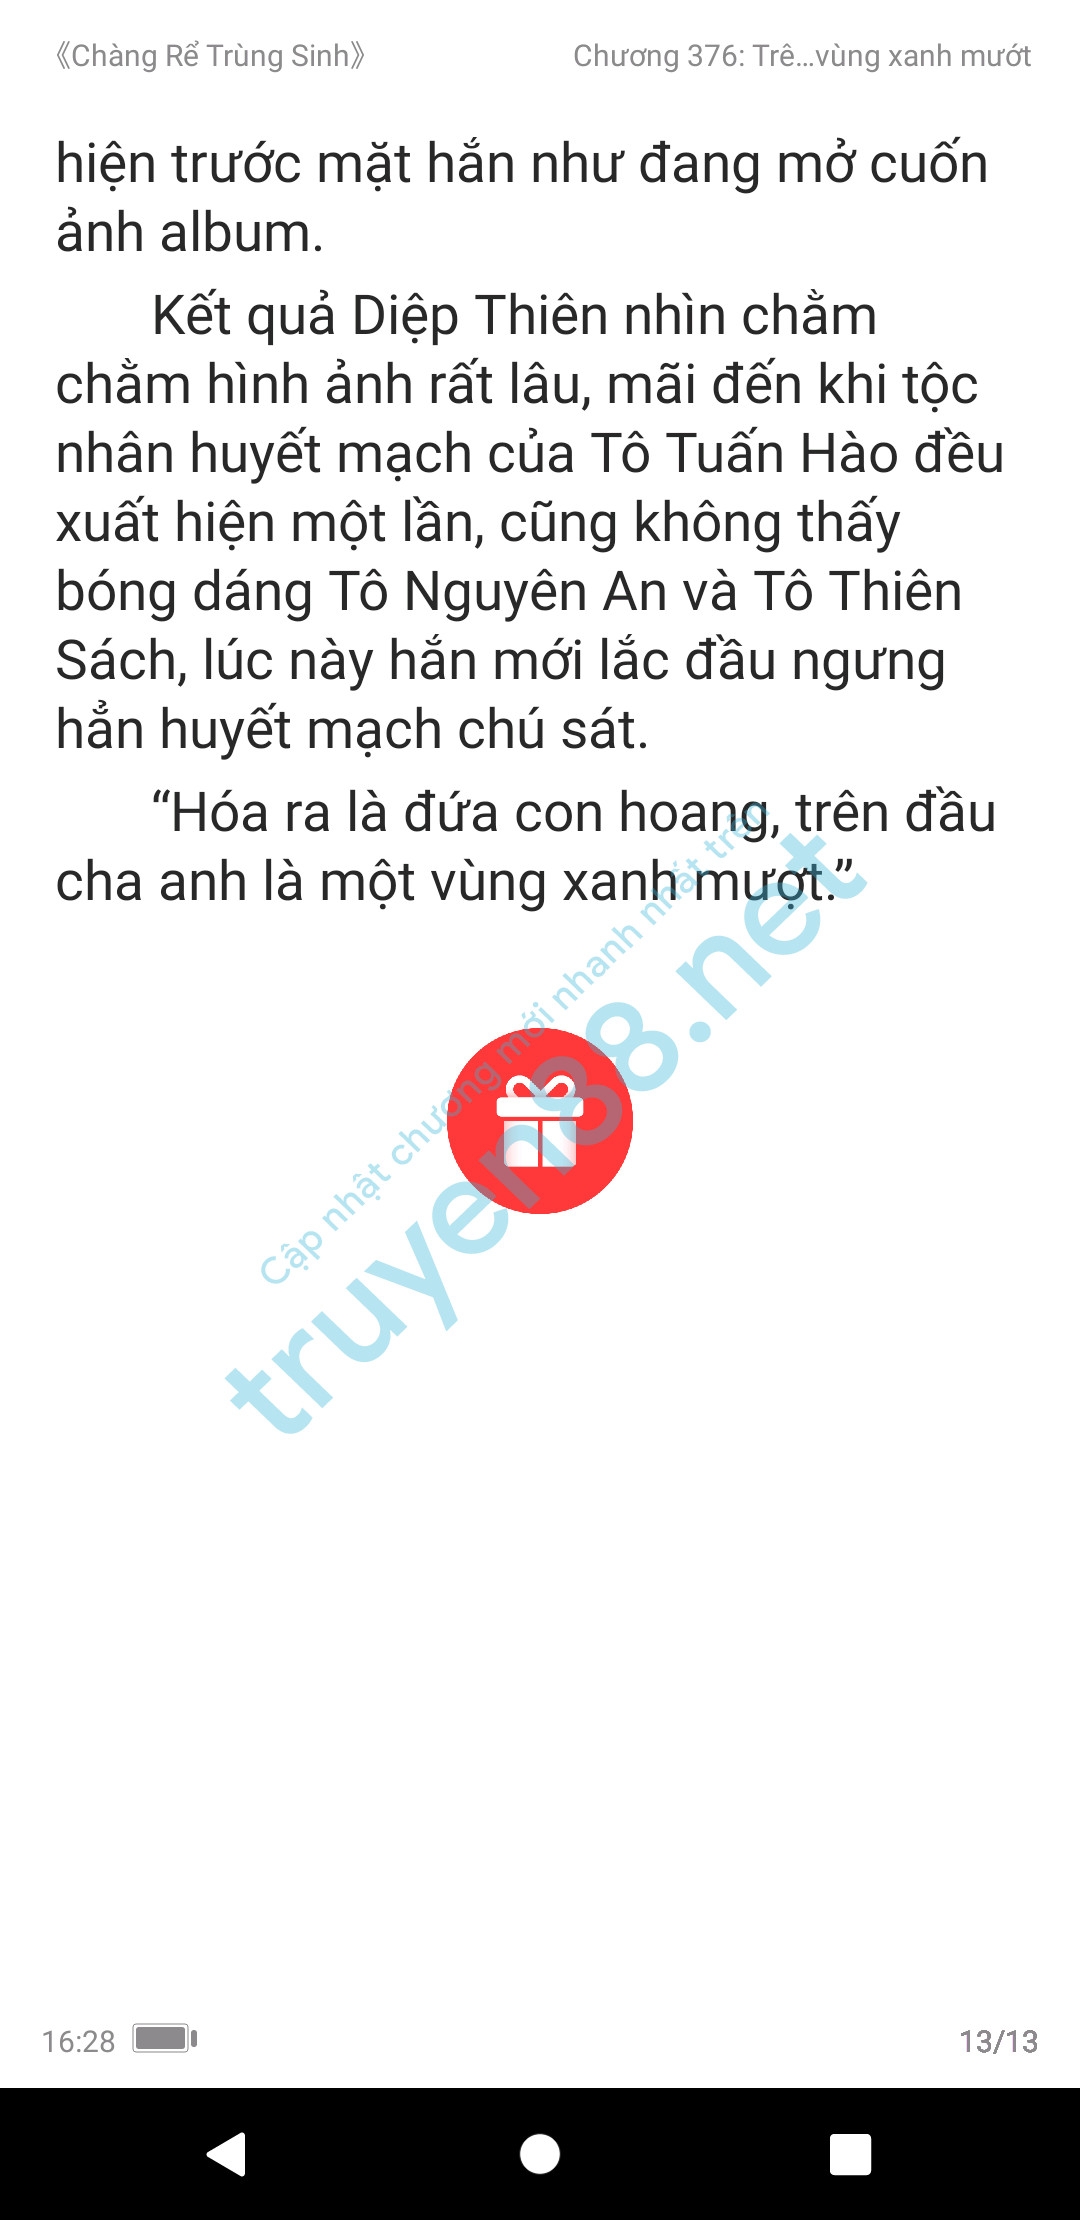 chang-re-trung-sinh-376-2